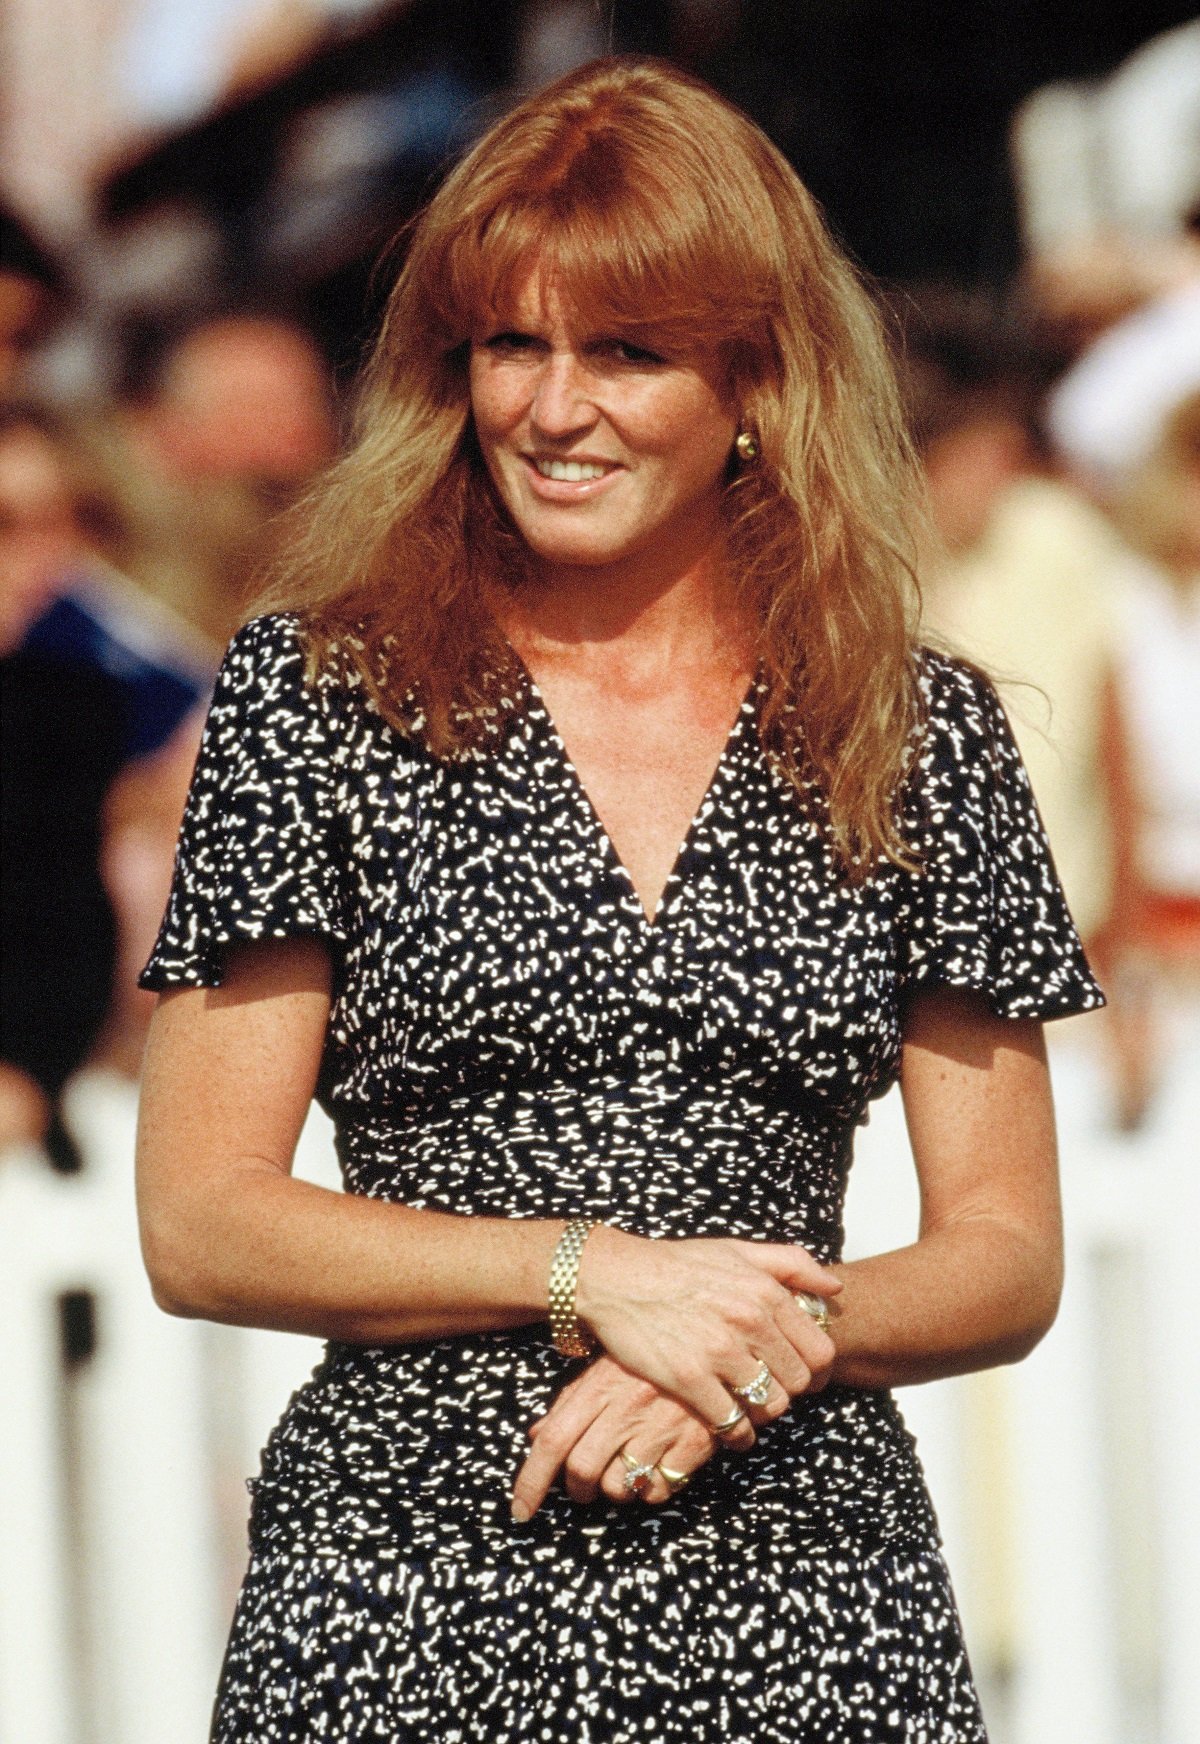 Sarah Ferguson in a black and white dress at the Paralympics opening ceremony in 1990